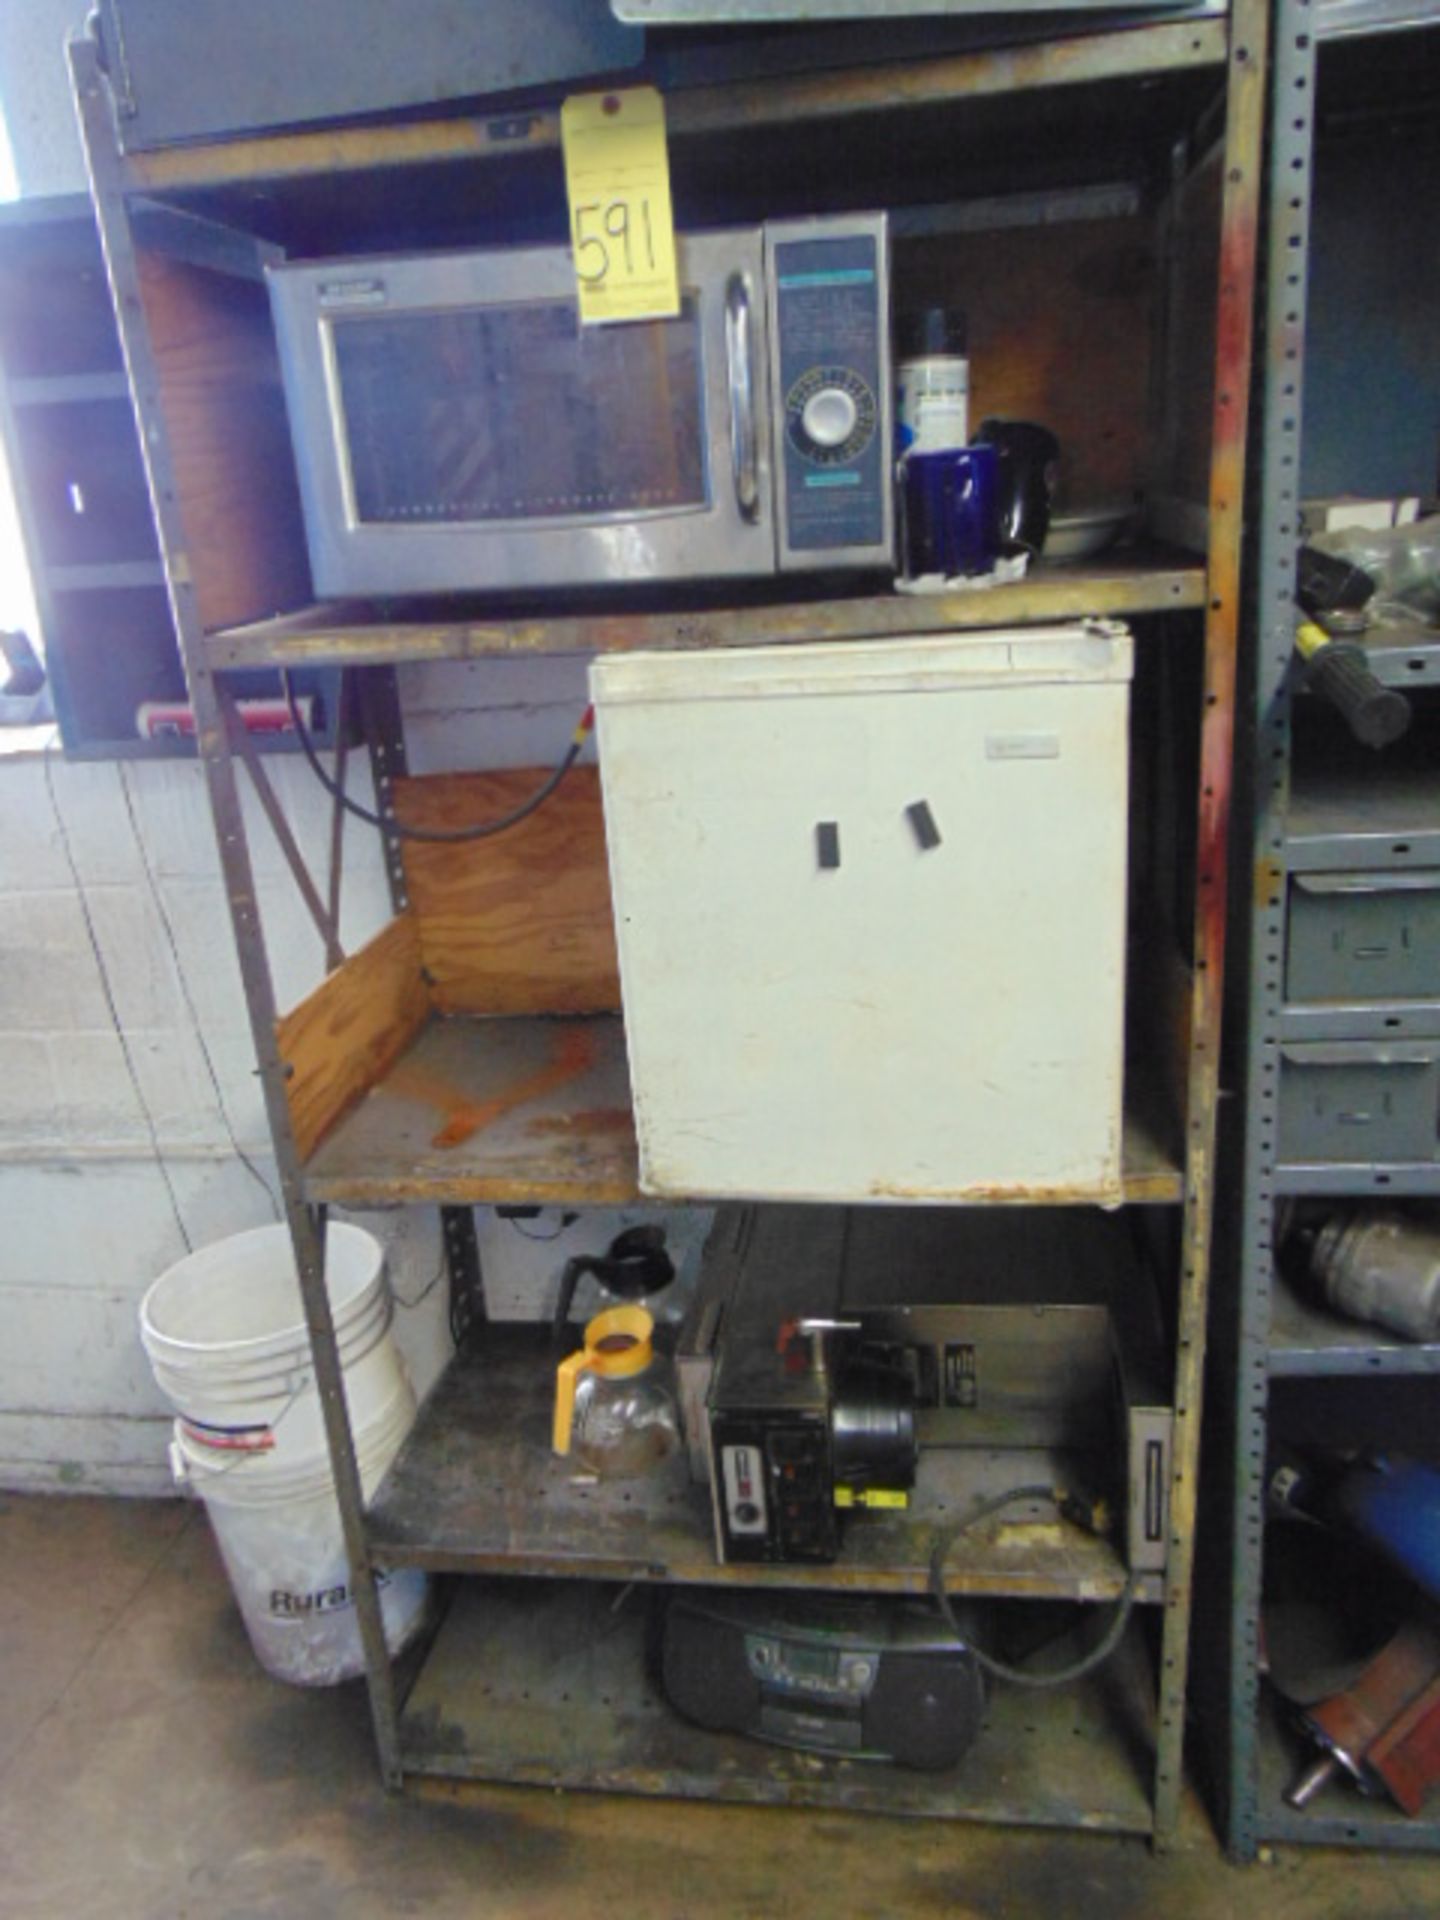 LOT CONSISTING OF: microwave oven, refrigerator, coffee maker, w/rack